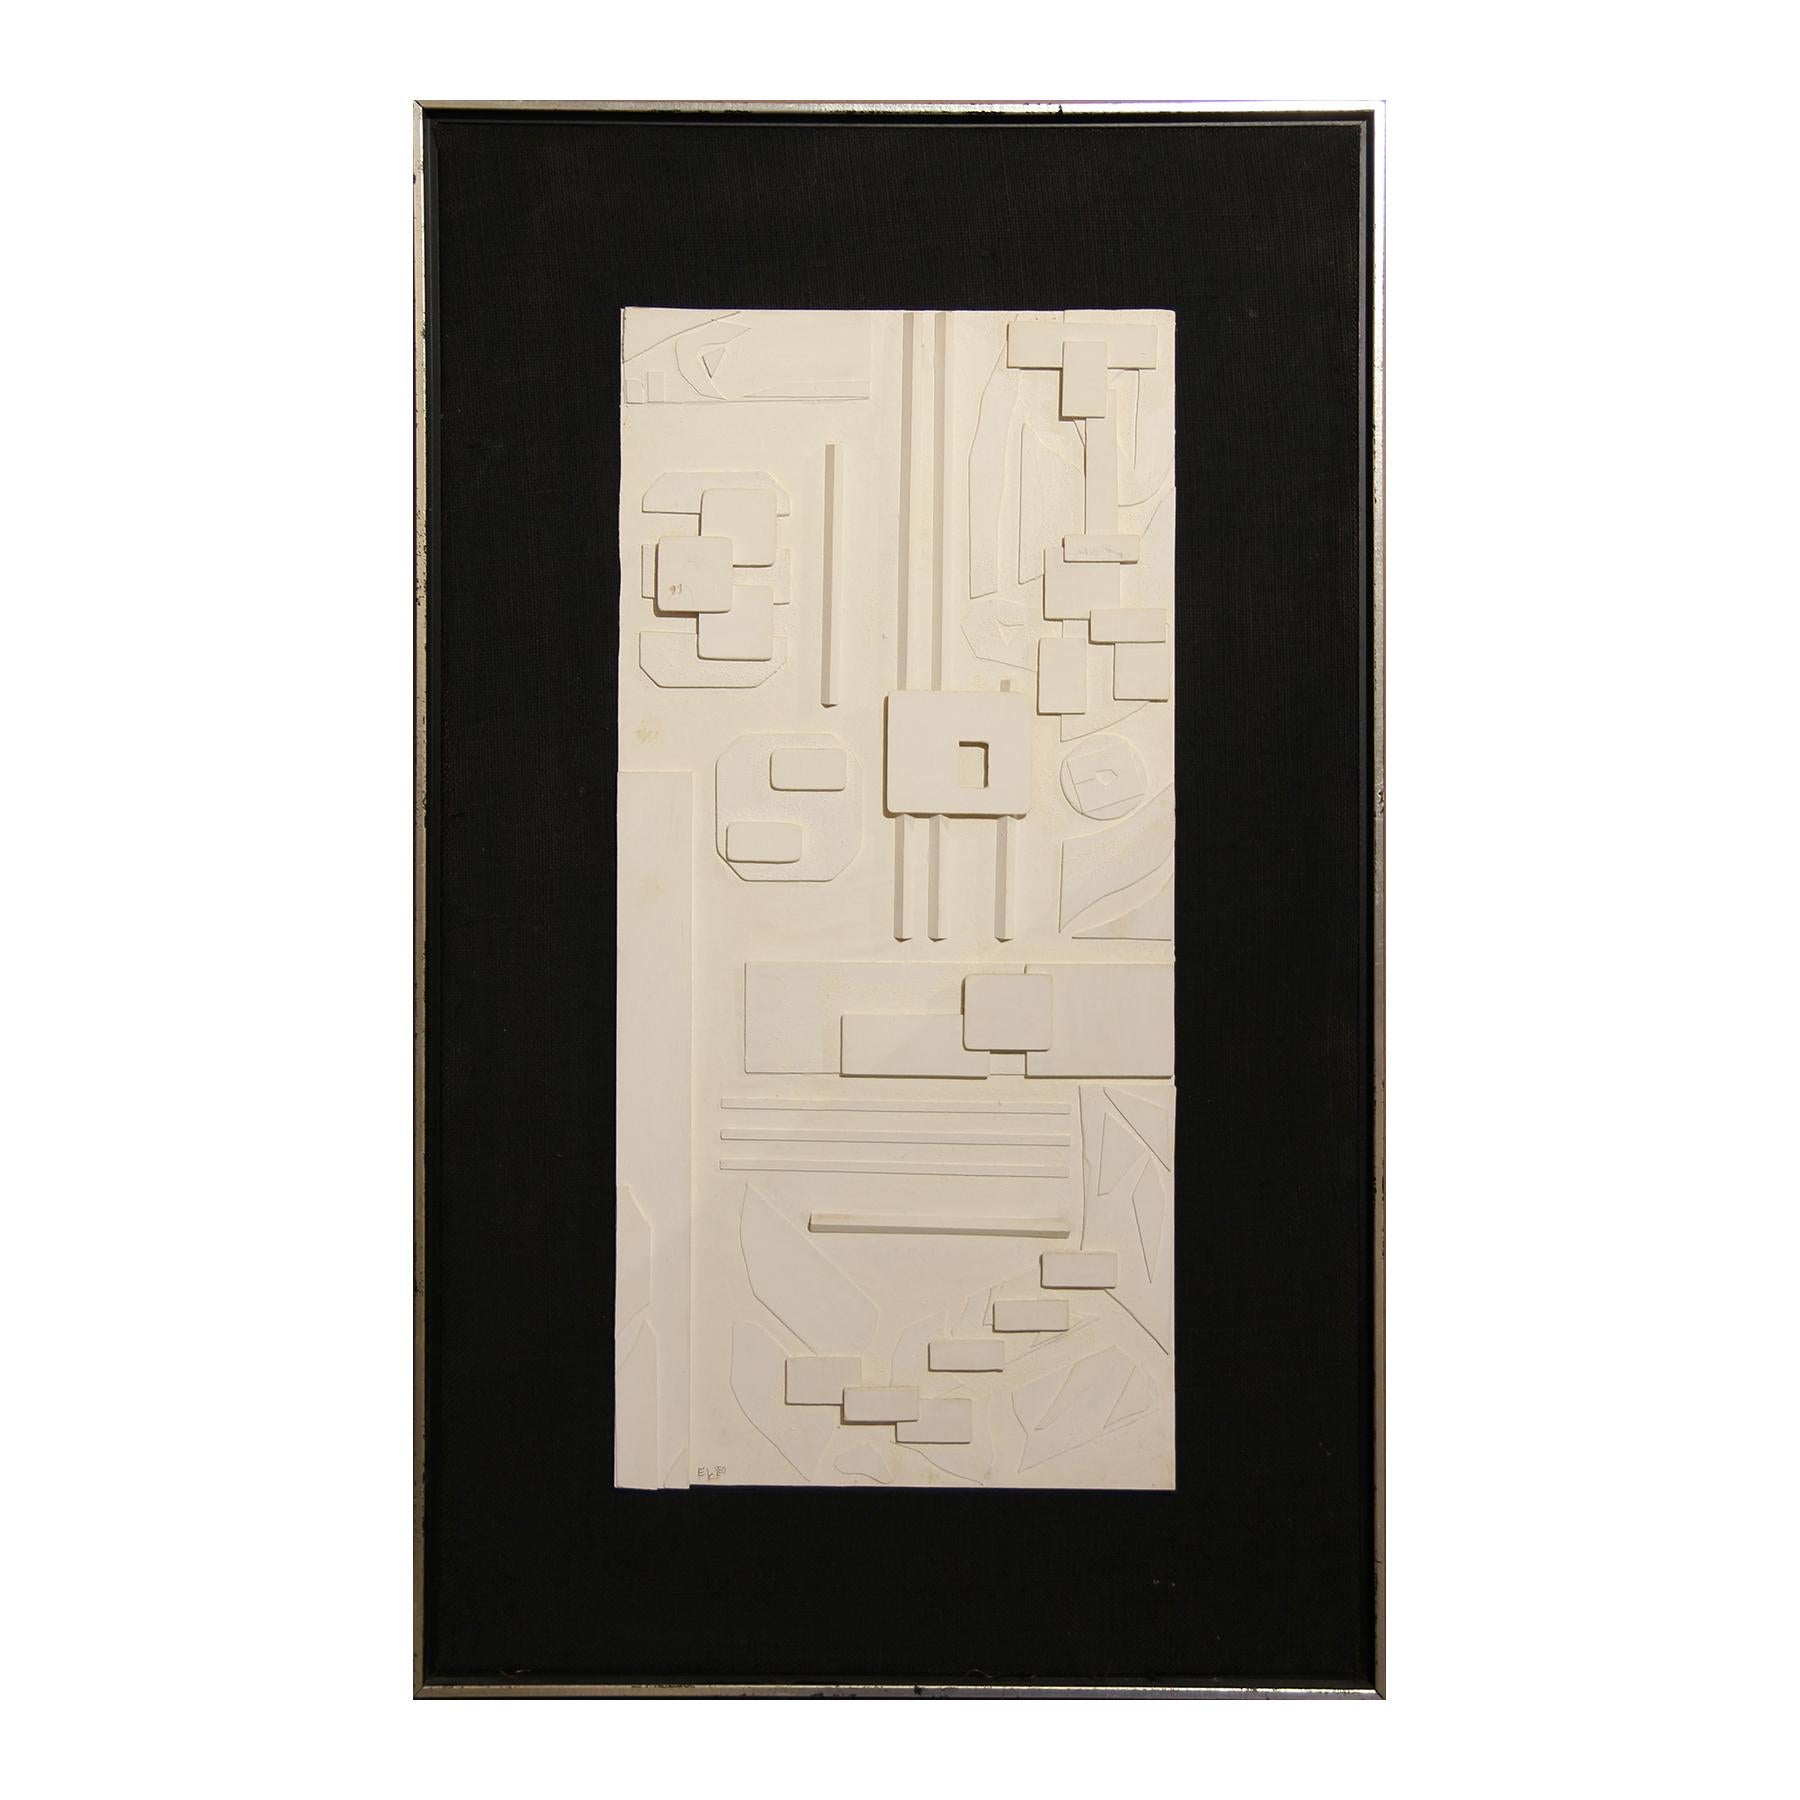 E. L. Leo Abstract Painting - Abstract Geometric Black and White Mixed Media Sculptural Painting